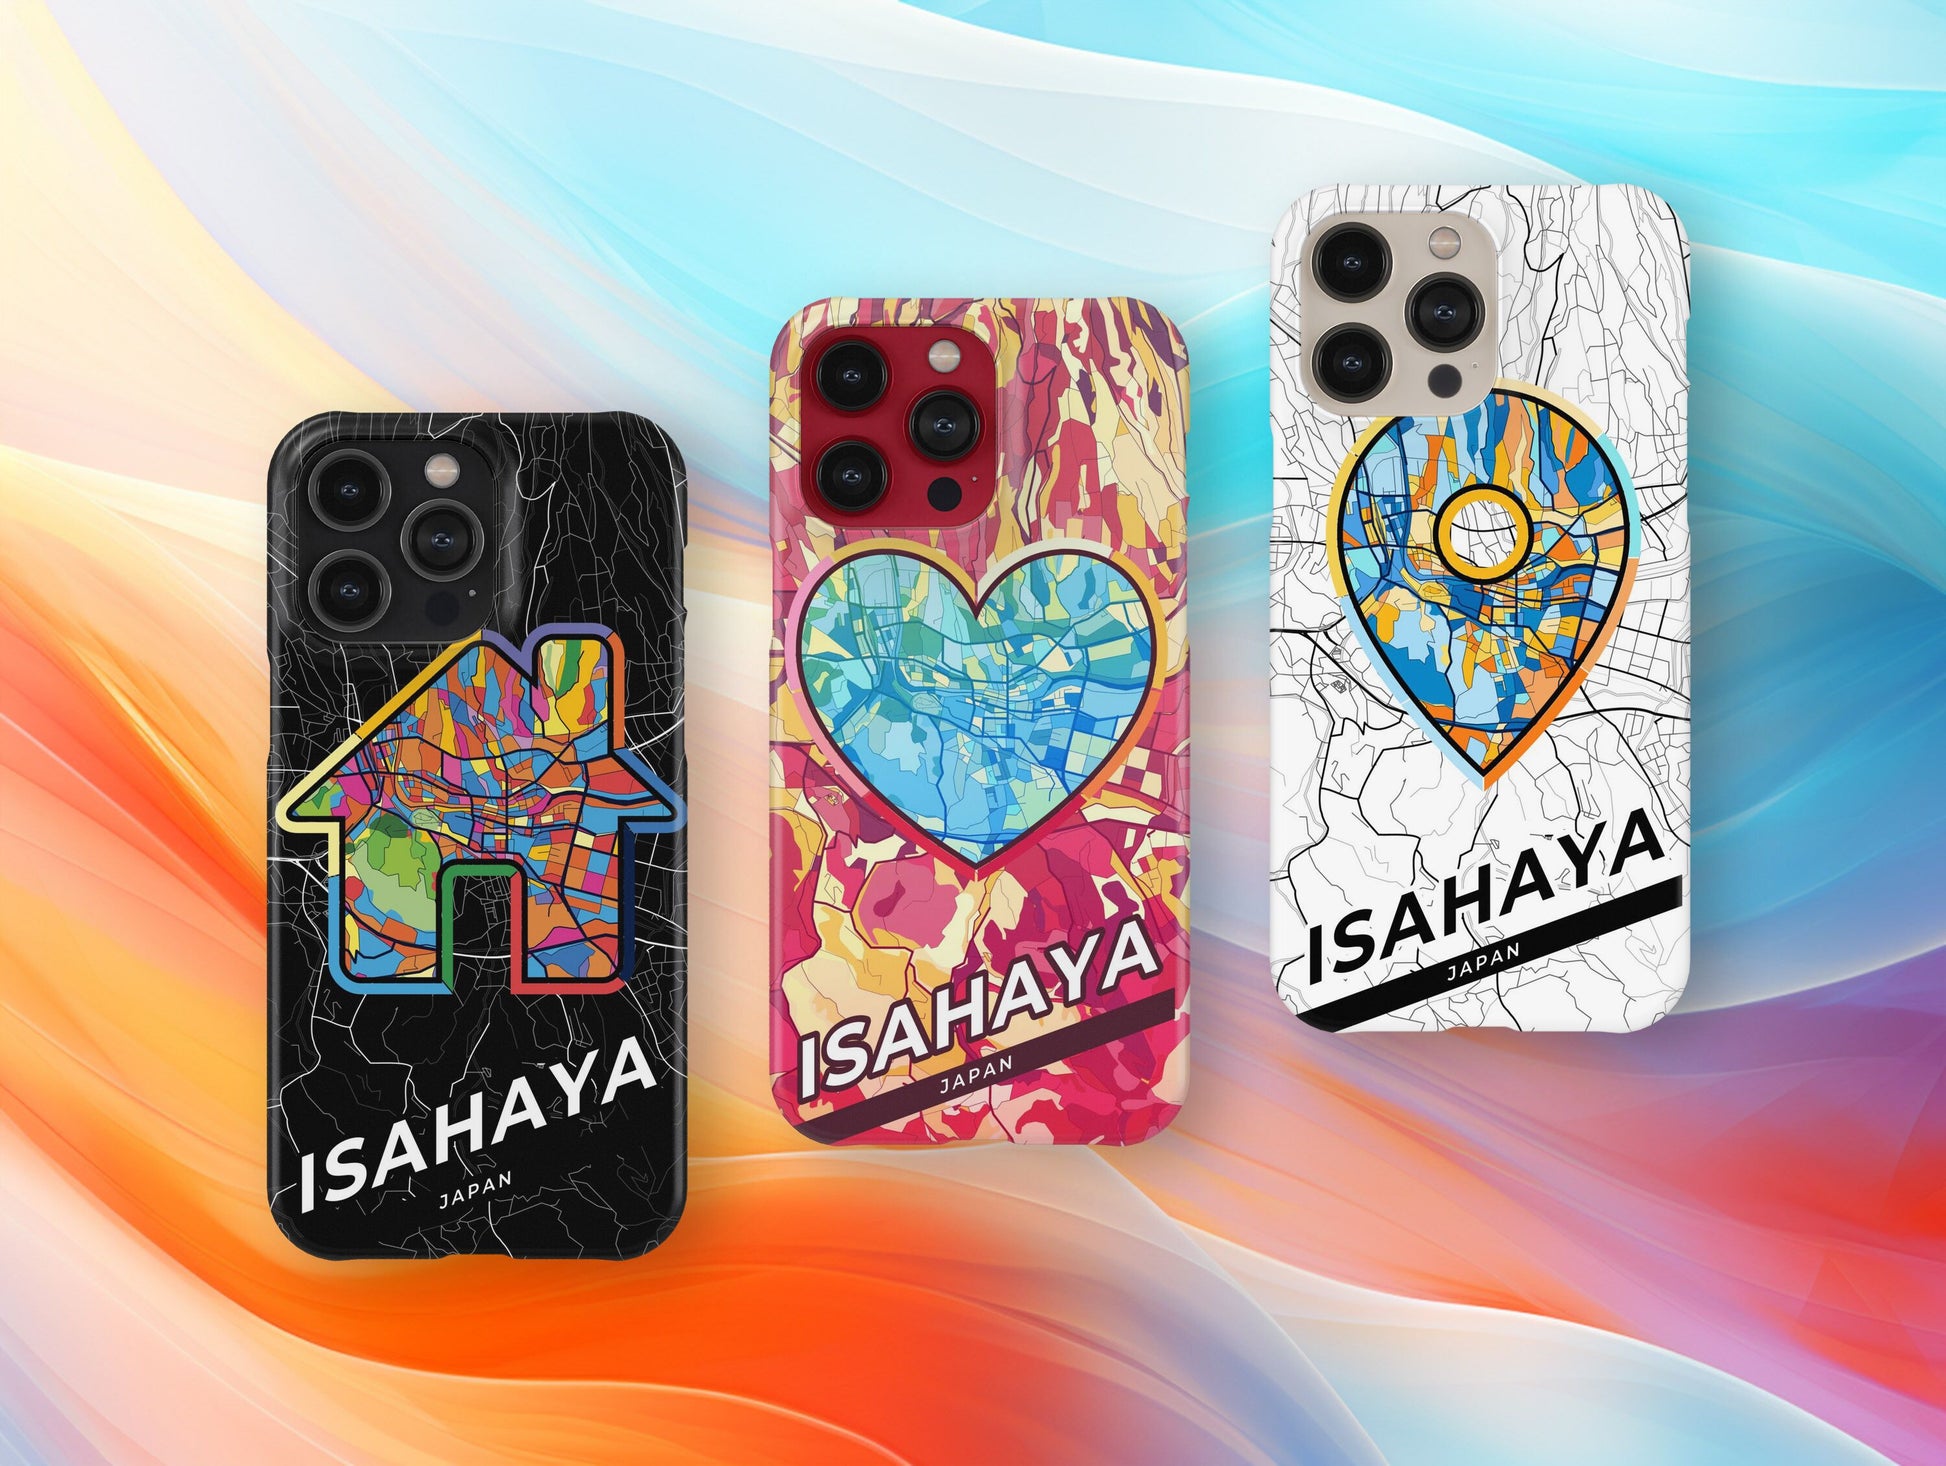 Isahaya Japan slim phone case with colorful icon. Birthday, wedding or housewarming gift. Couple match cases.